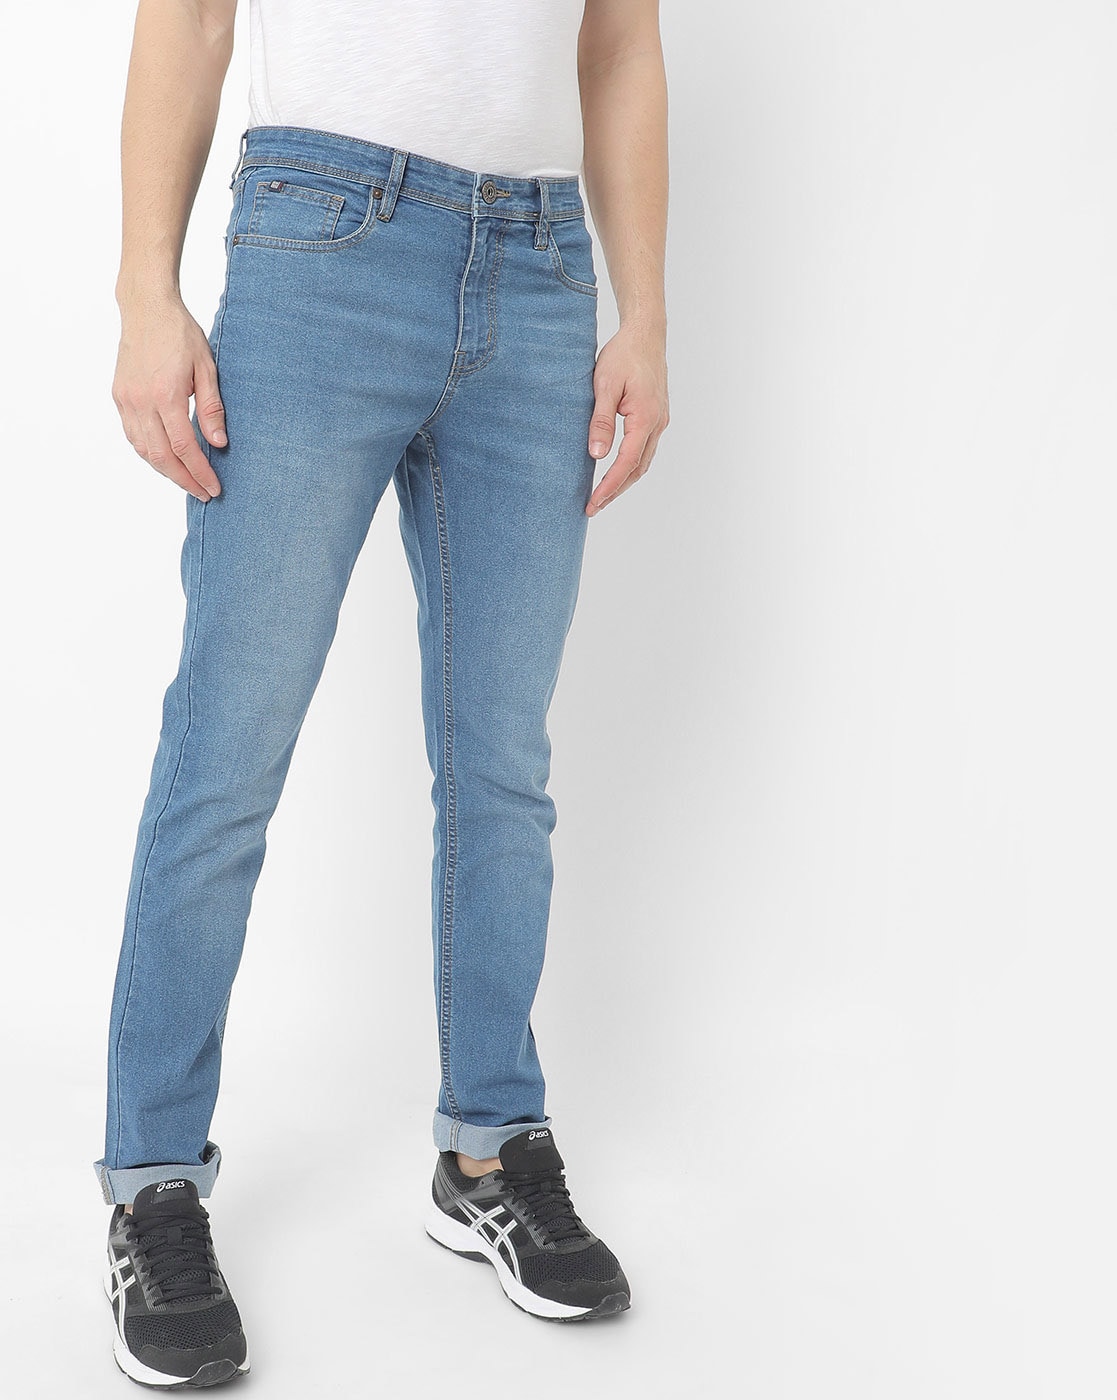 DOSLAVIDA Men's Casual Ripped Jeans Loose Fit India | Ubuy